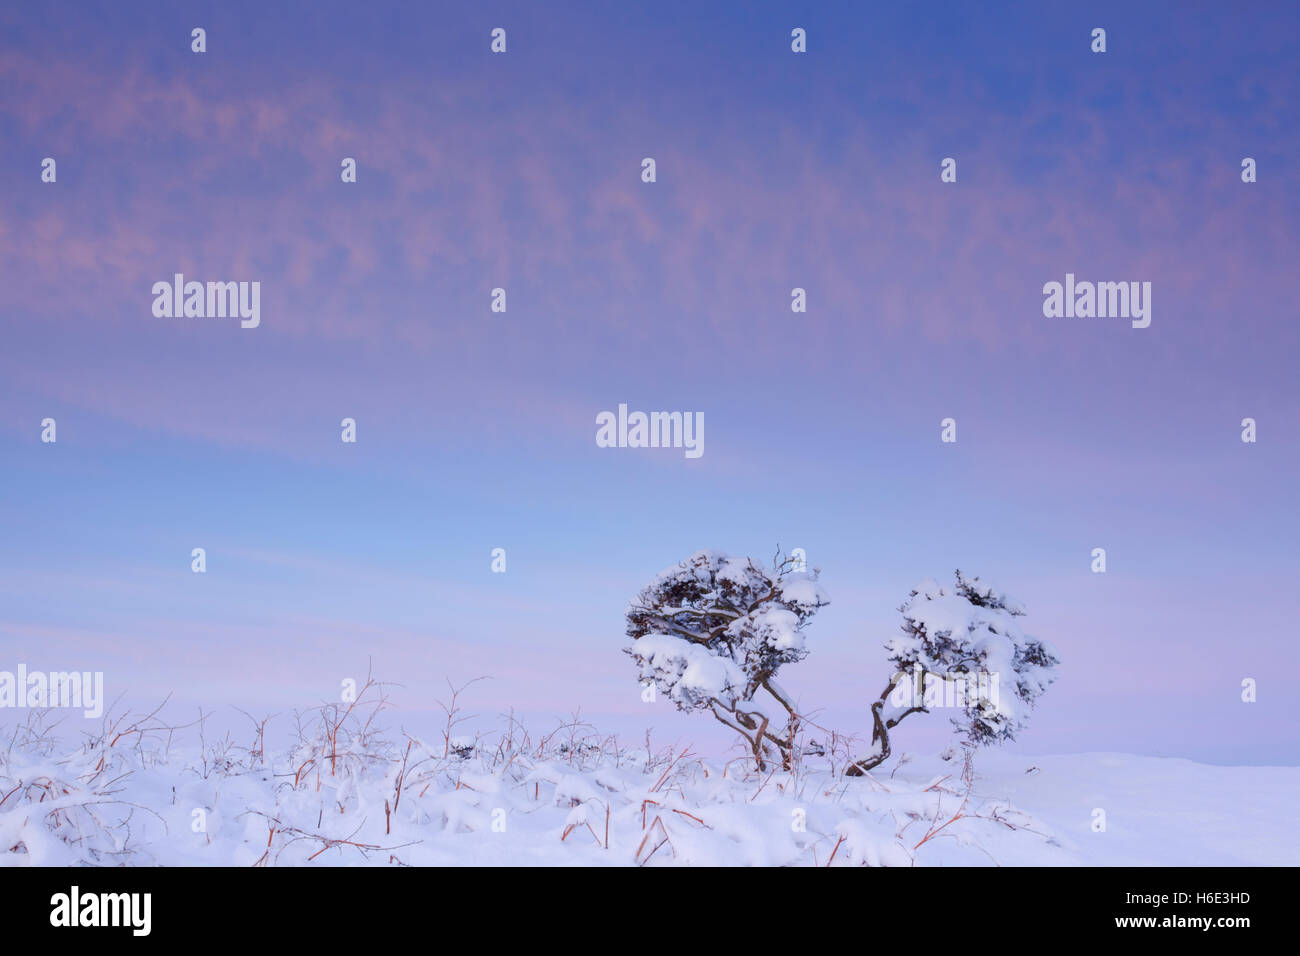 Two small twisted shrubs on moorland during winter with snow on the ground underneath a colourful dawn sky Stock Photo